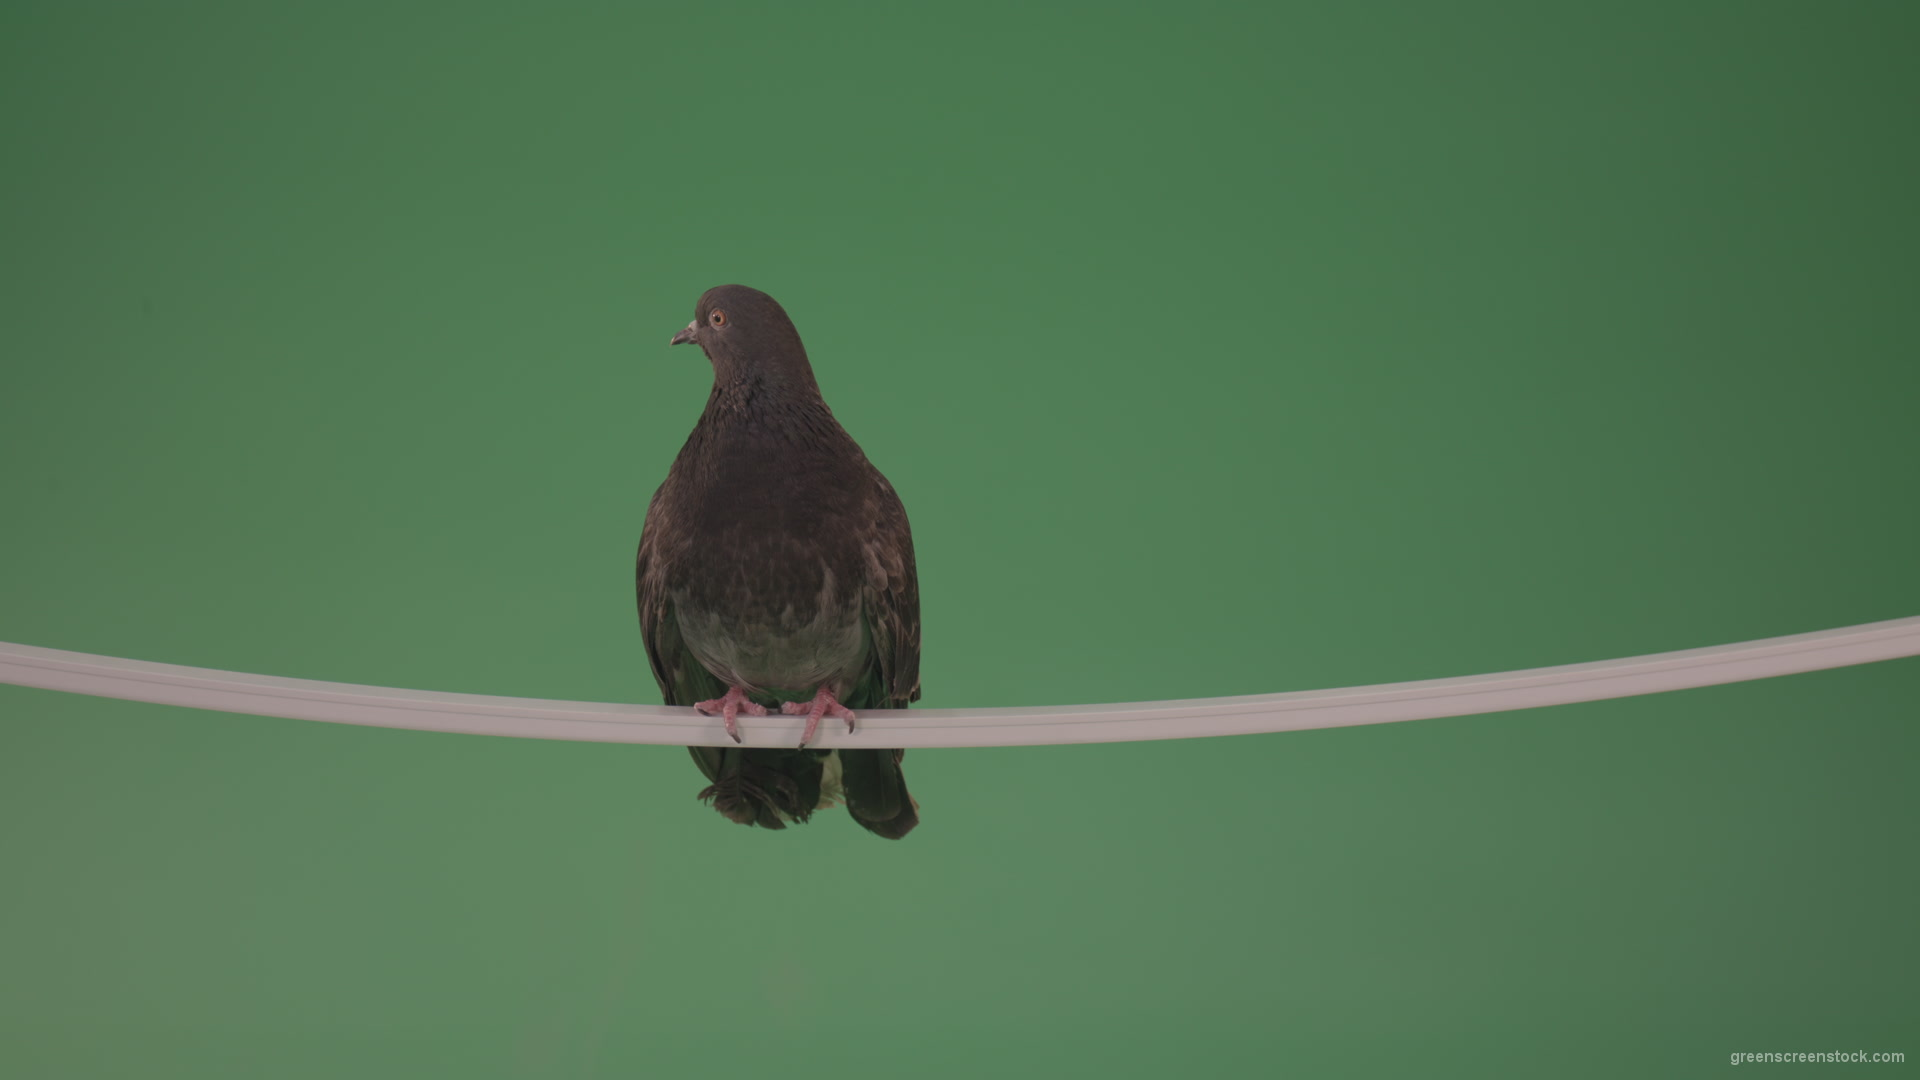 Beautiful-bird-of-doves-flew-to-explore-the-terrain-isolated-on-chromakey-background_001 Green Screen Stock